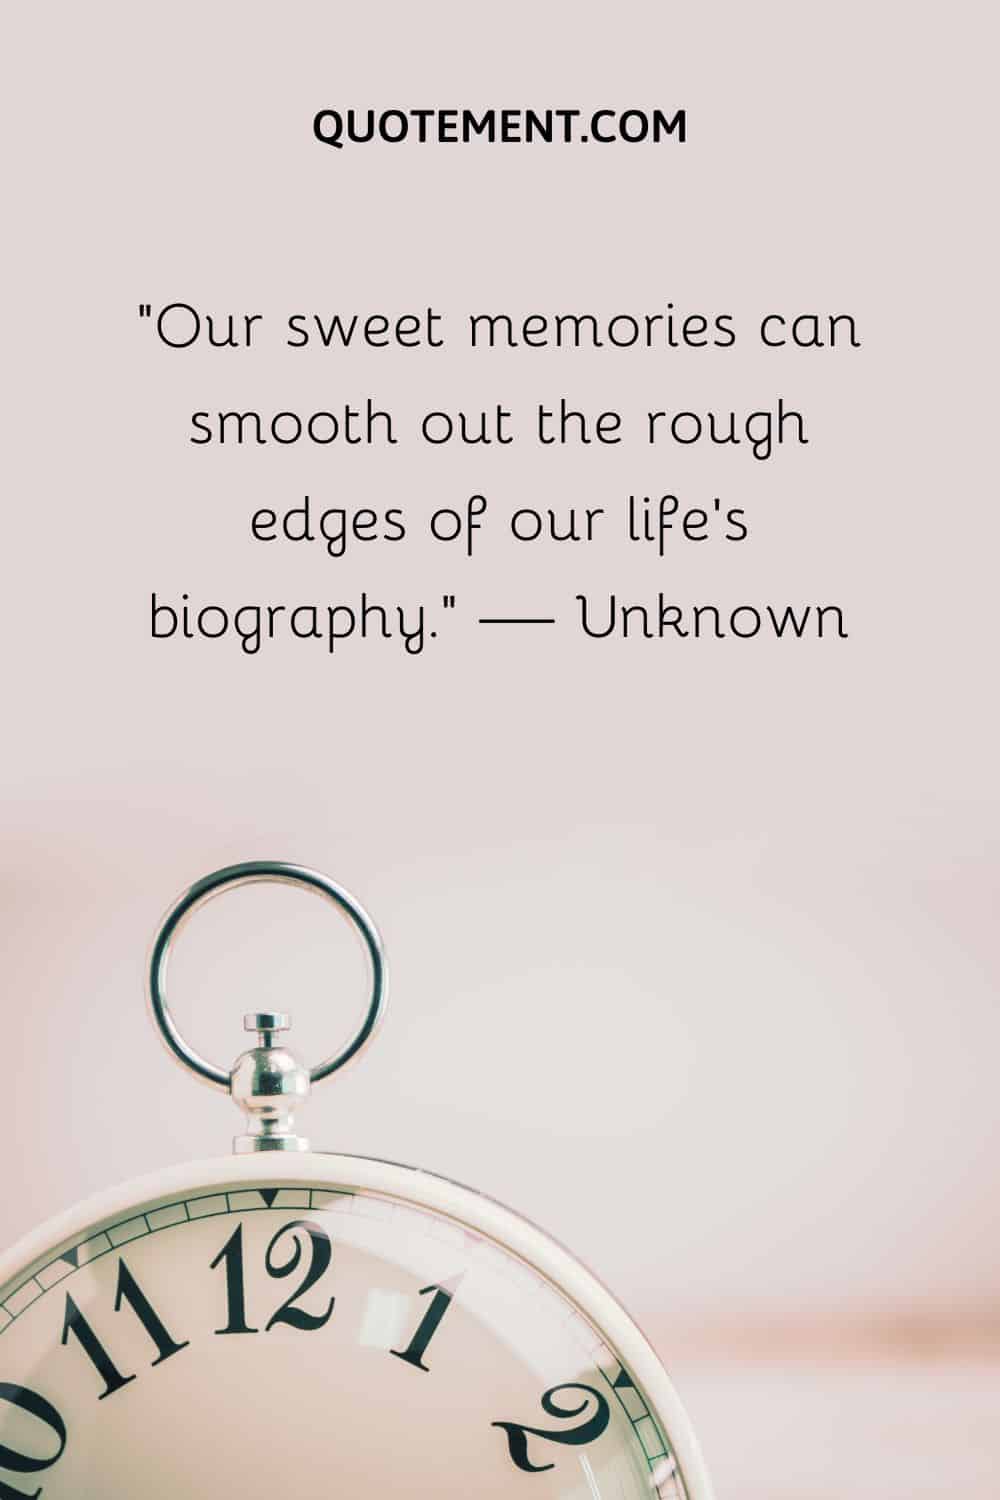 Our sweet memories can smooth out the rough edges of our life’s biography